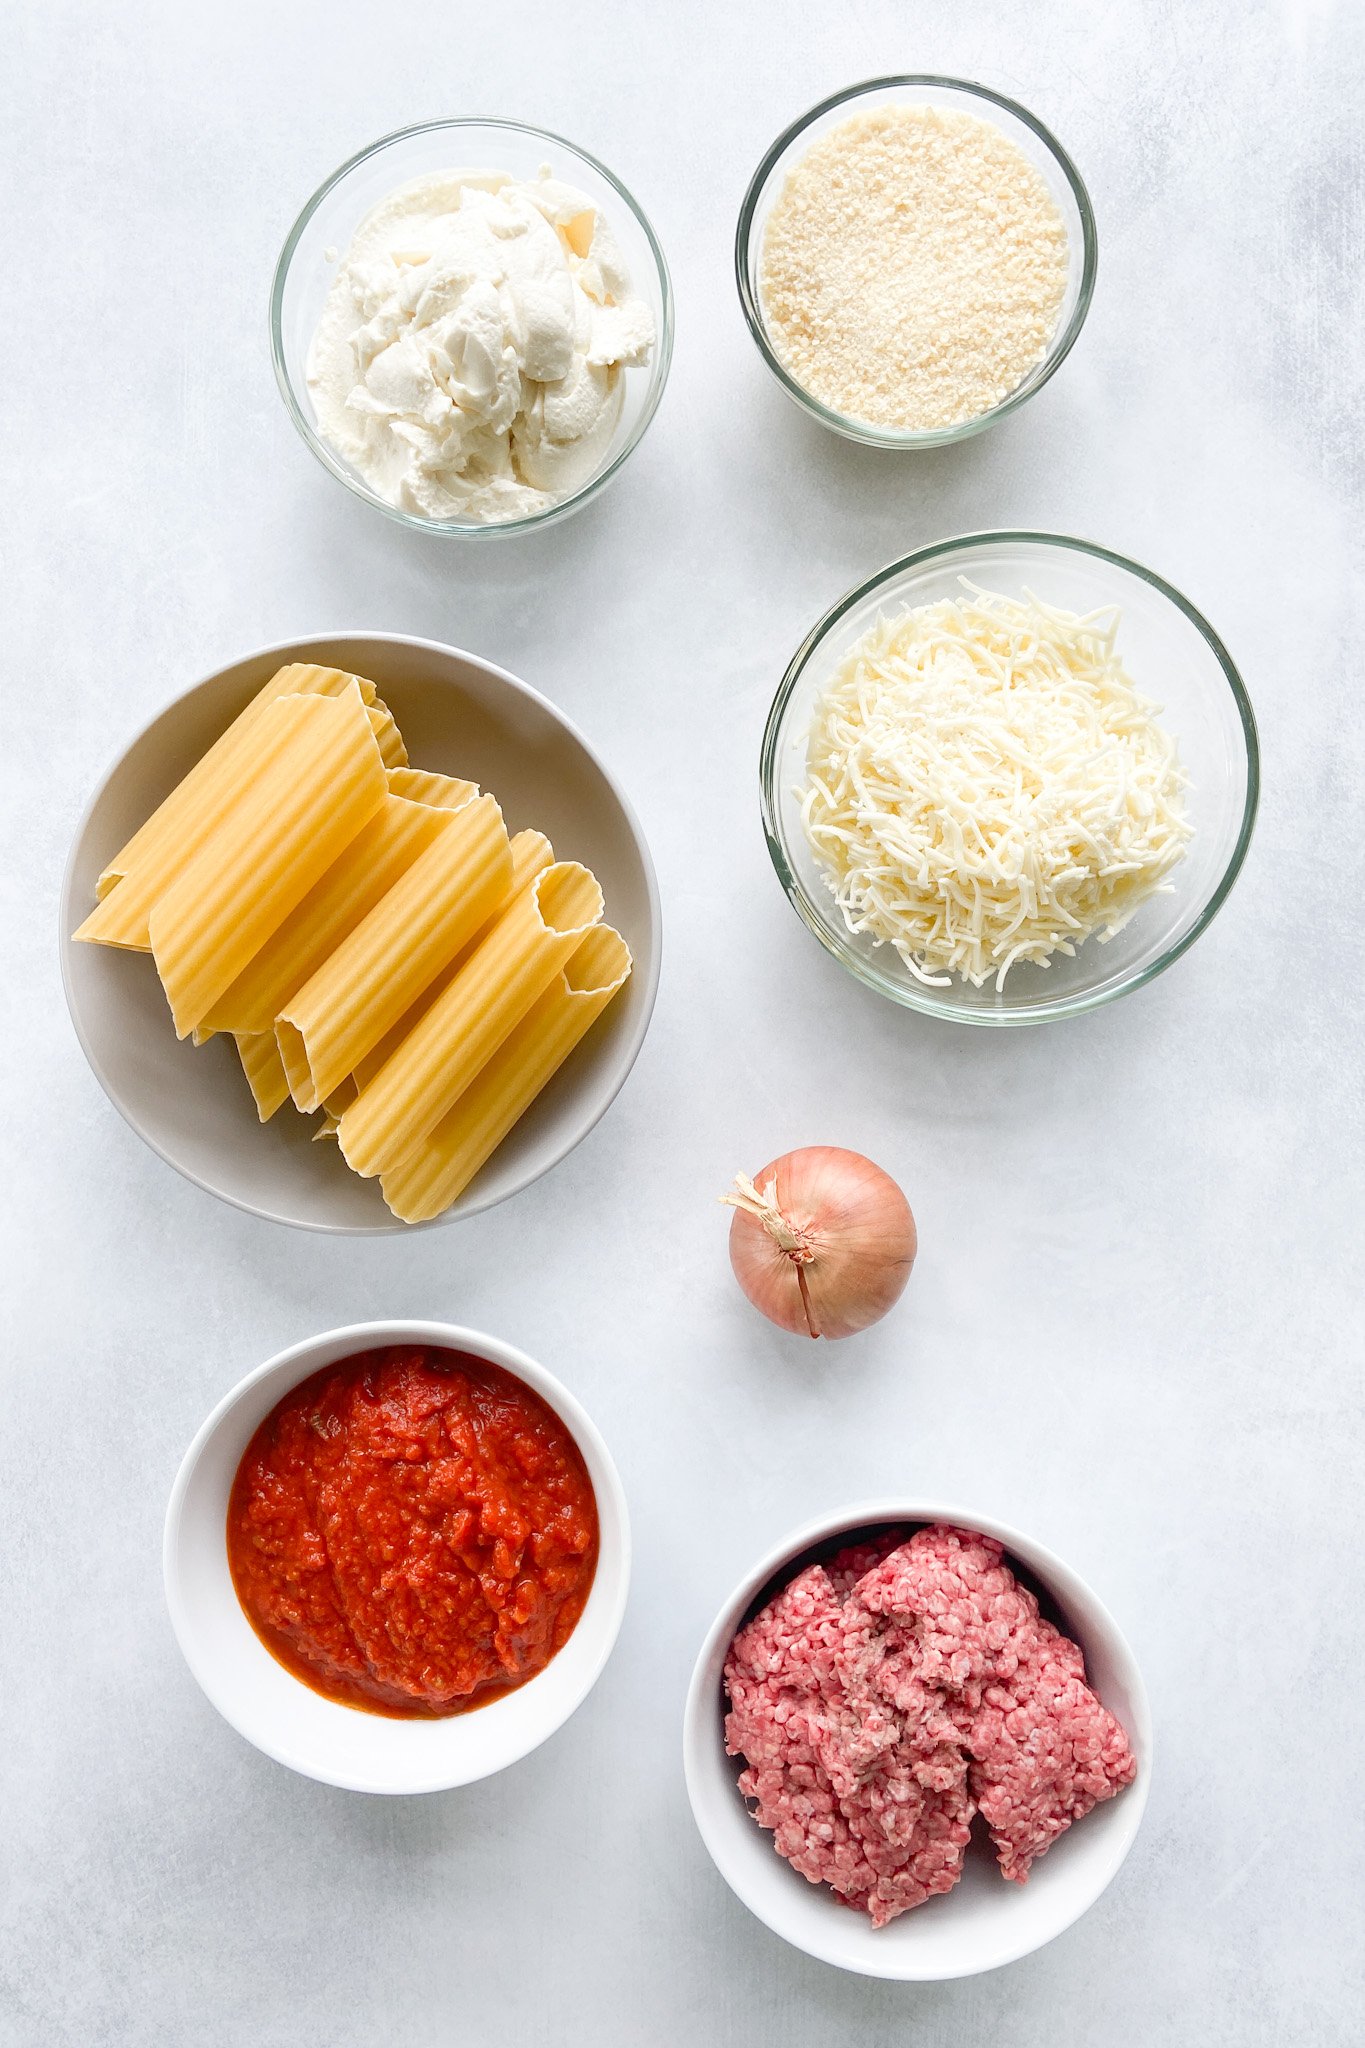 Ingredients to make cheesy beef manicotti. See recipe card for detailed ingredient quantities.